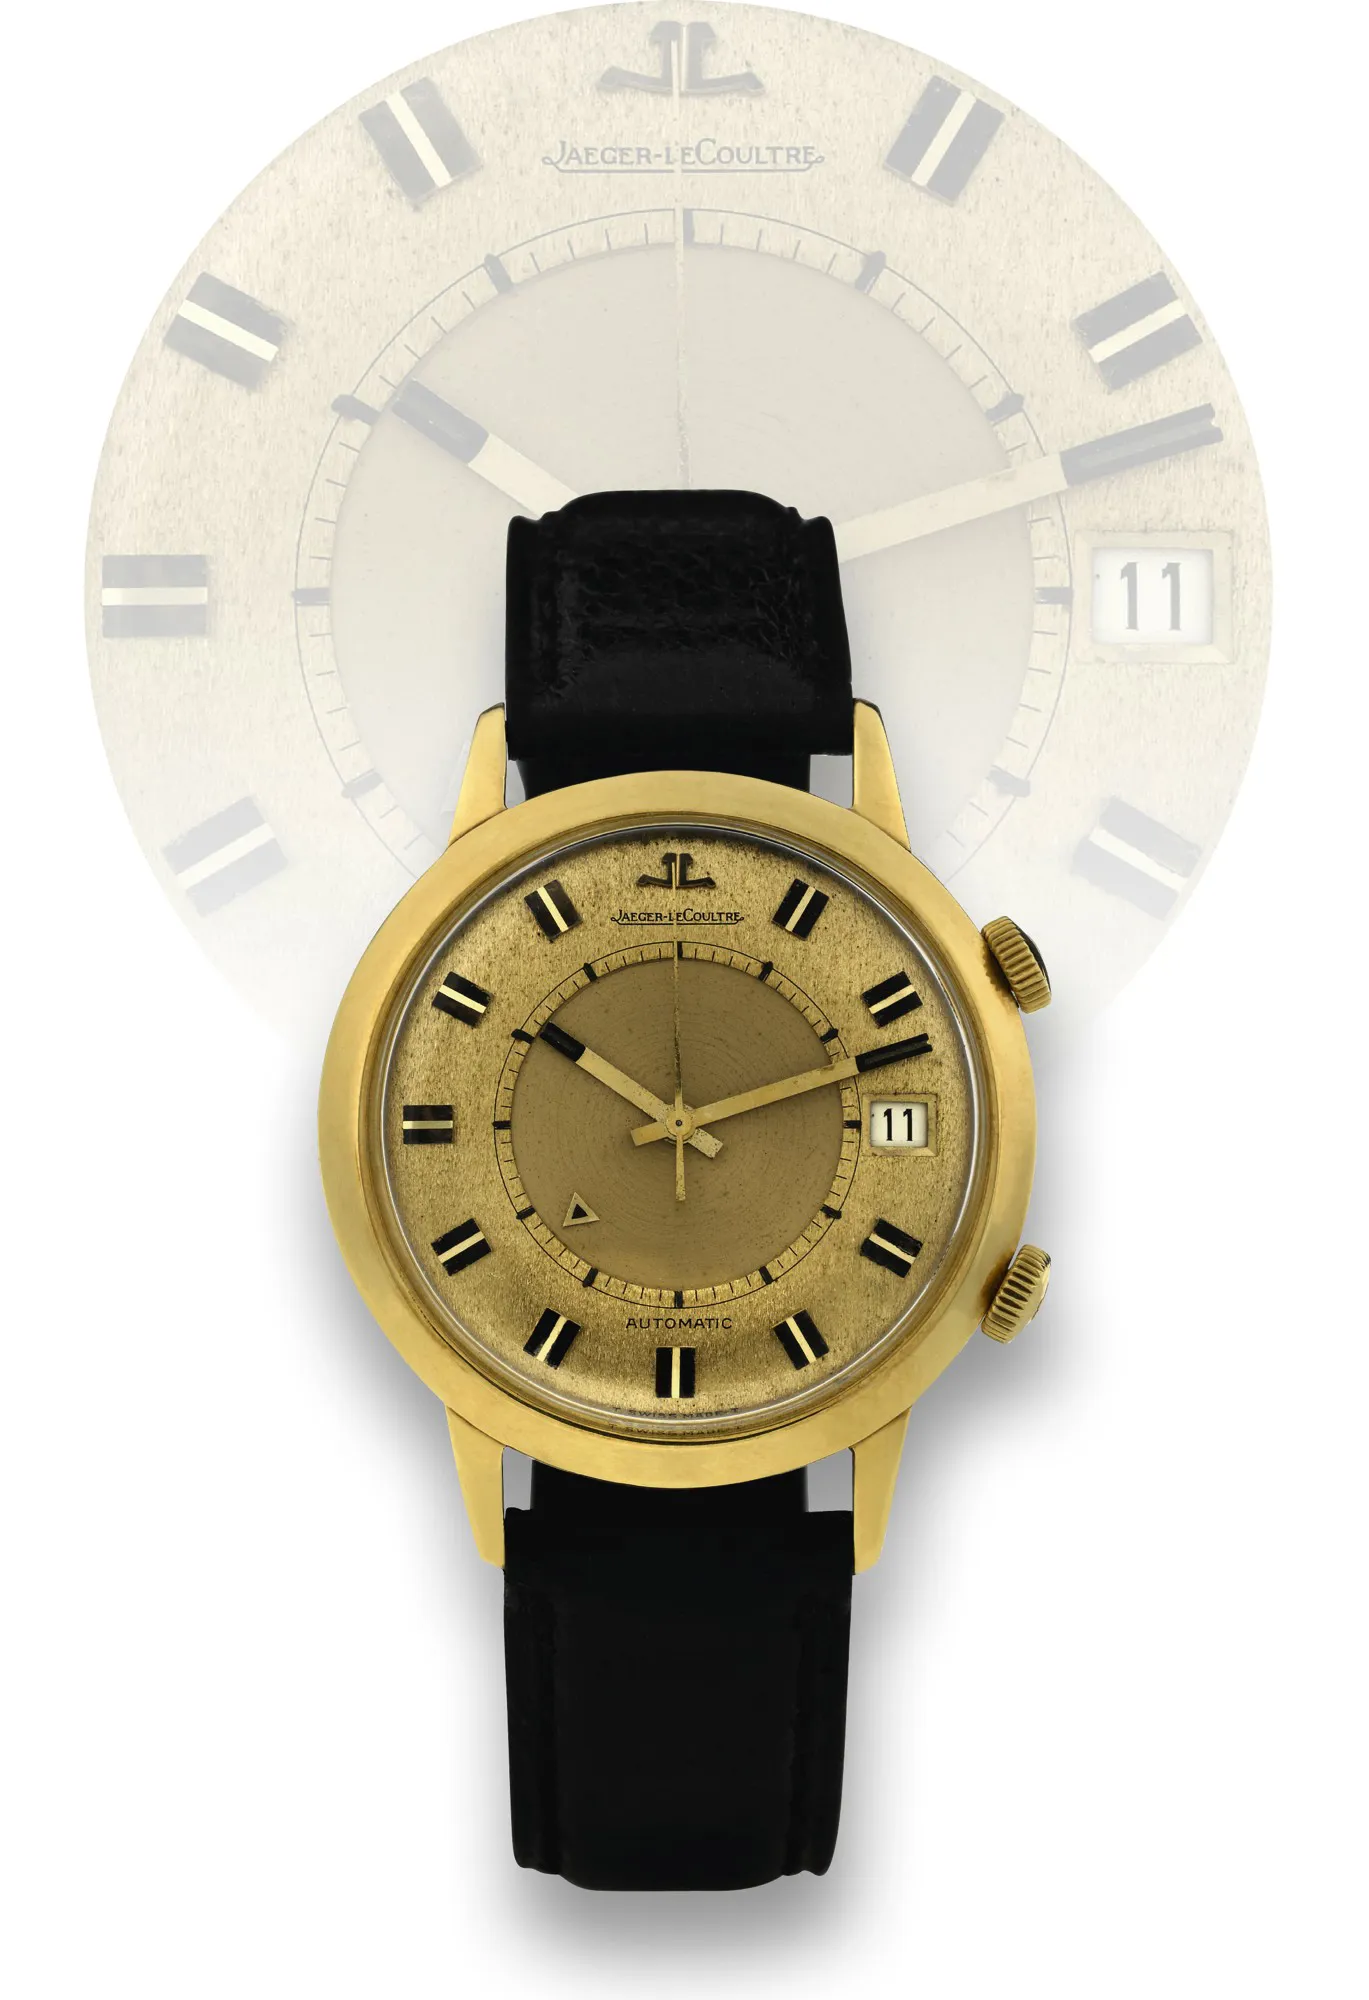 Jaeger-LeCoultre 855 37mm Yellow gold Champagne